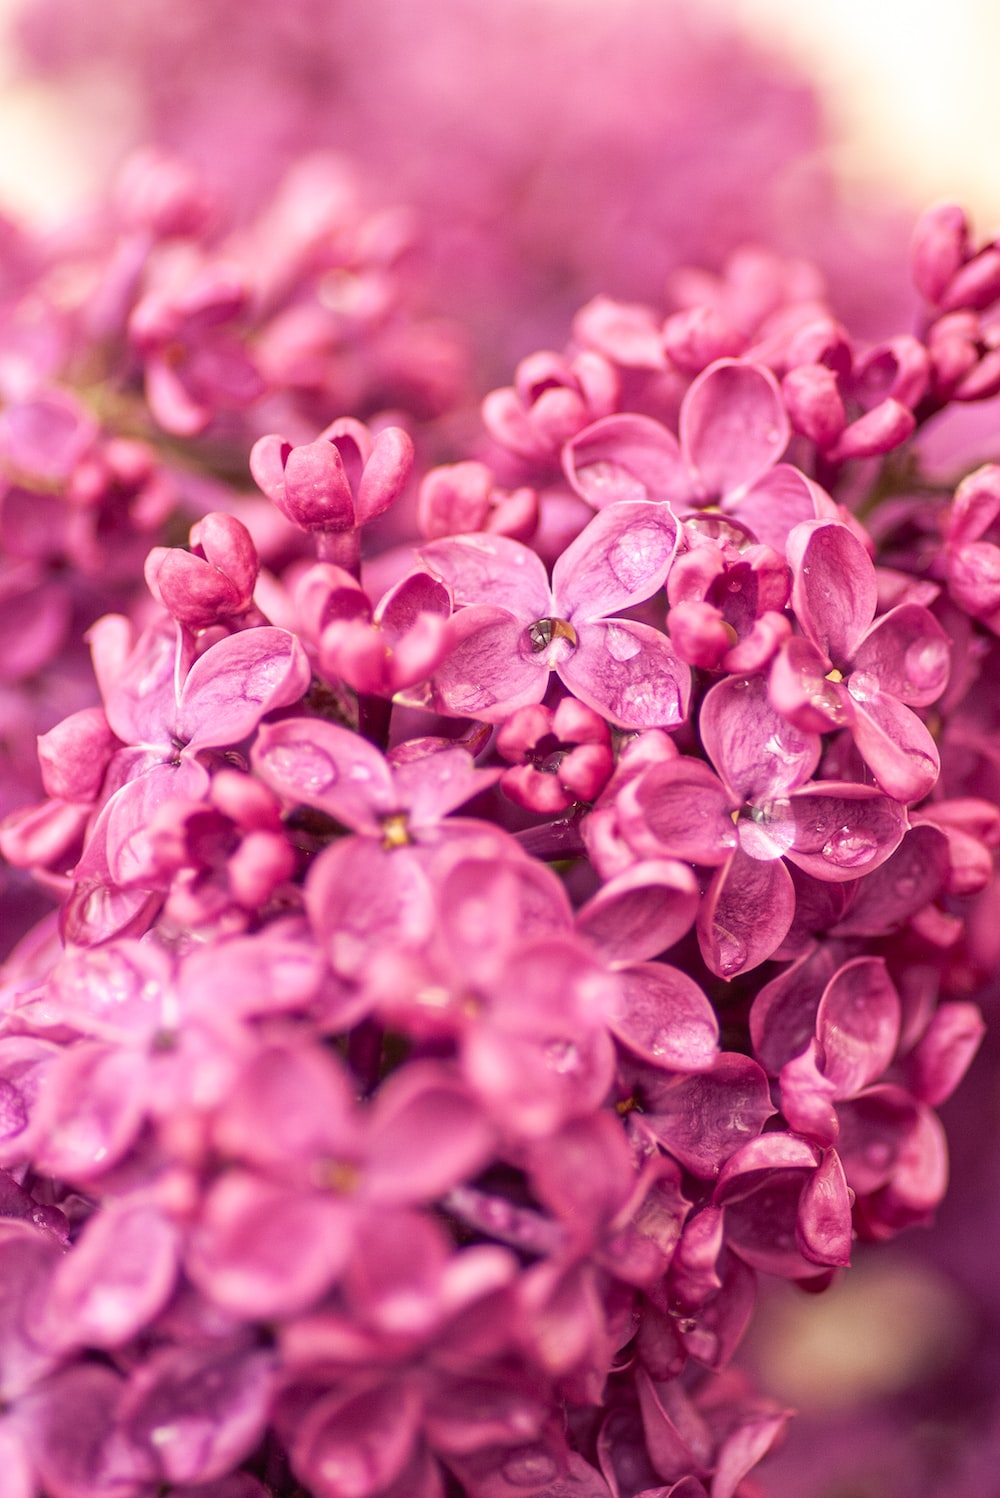 Lilac Wallpaper Picture. Download Free Image